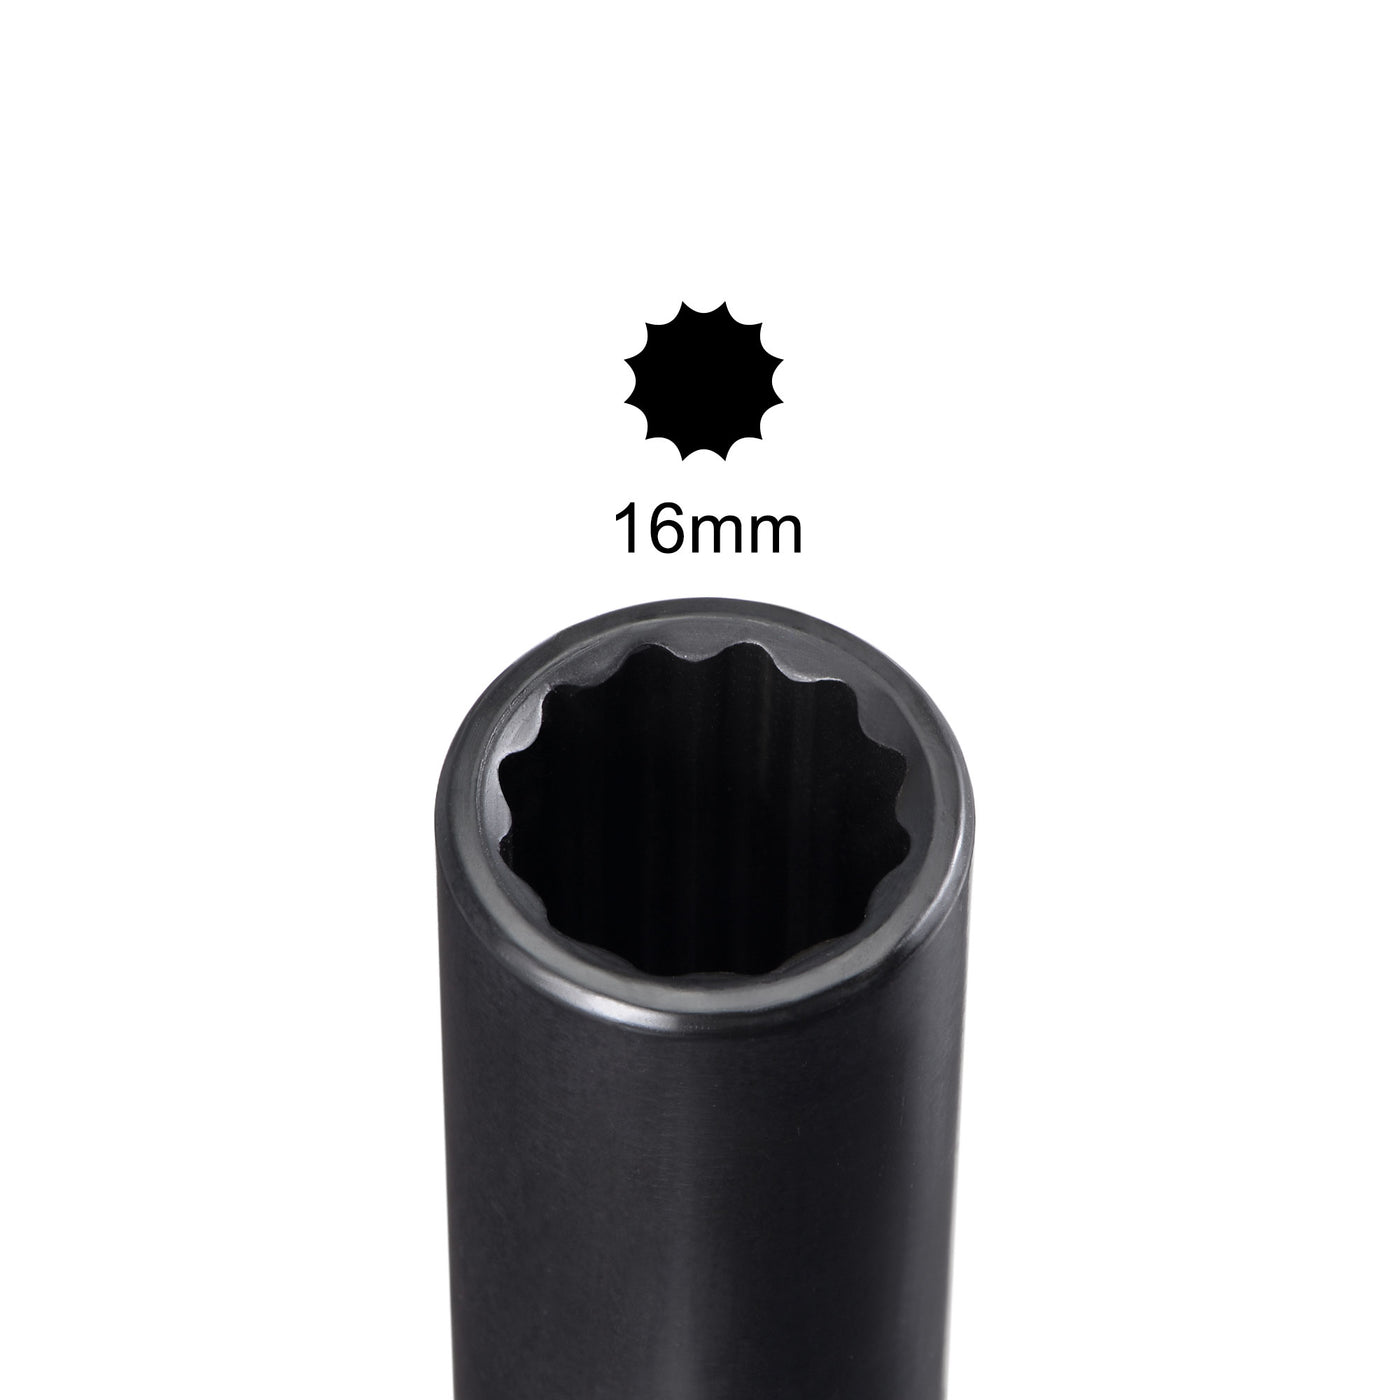 uxcell Uxcell 1/2-Inch Drive 16mm 12-Point Deep Impact Socket, CR-MO Steel 78mm Length, Metric